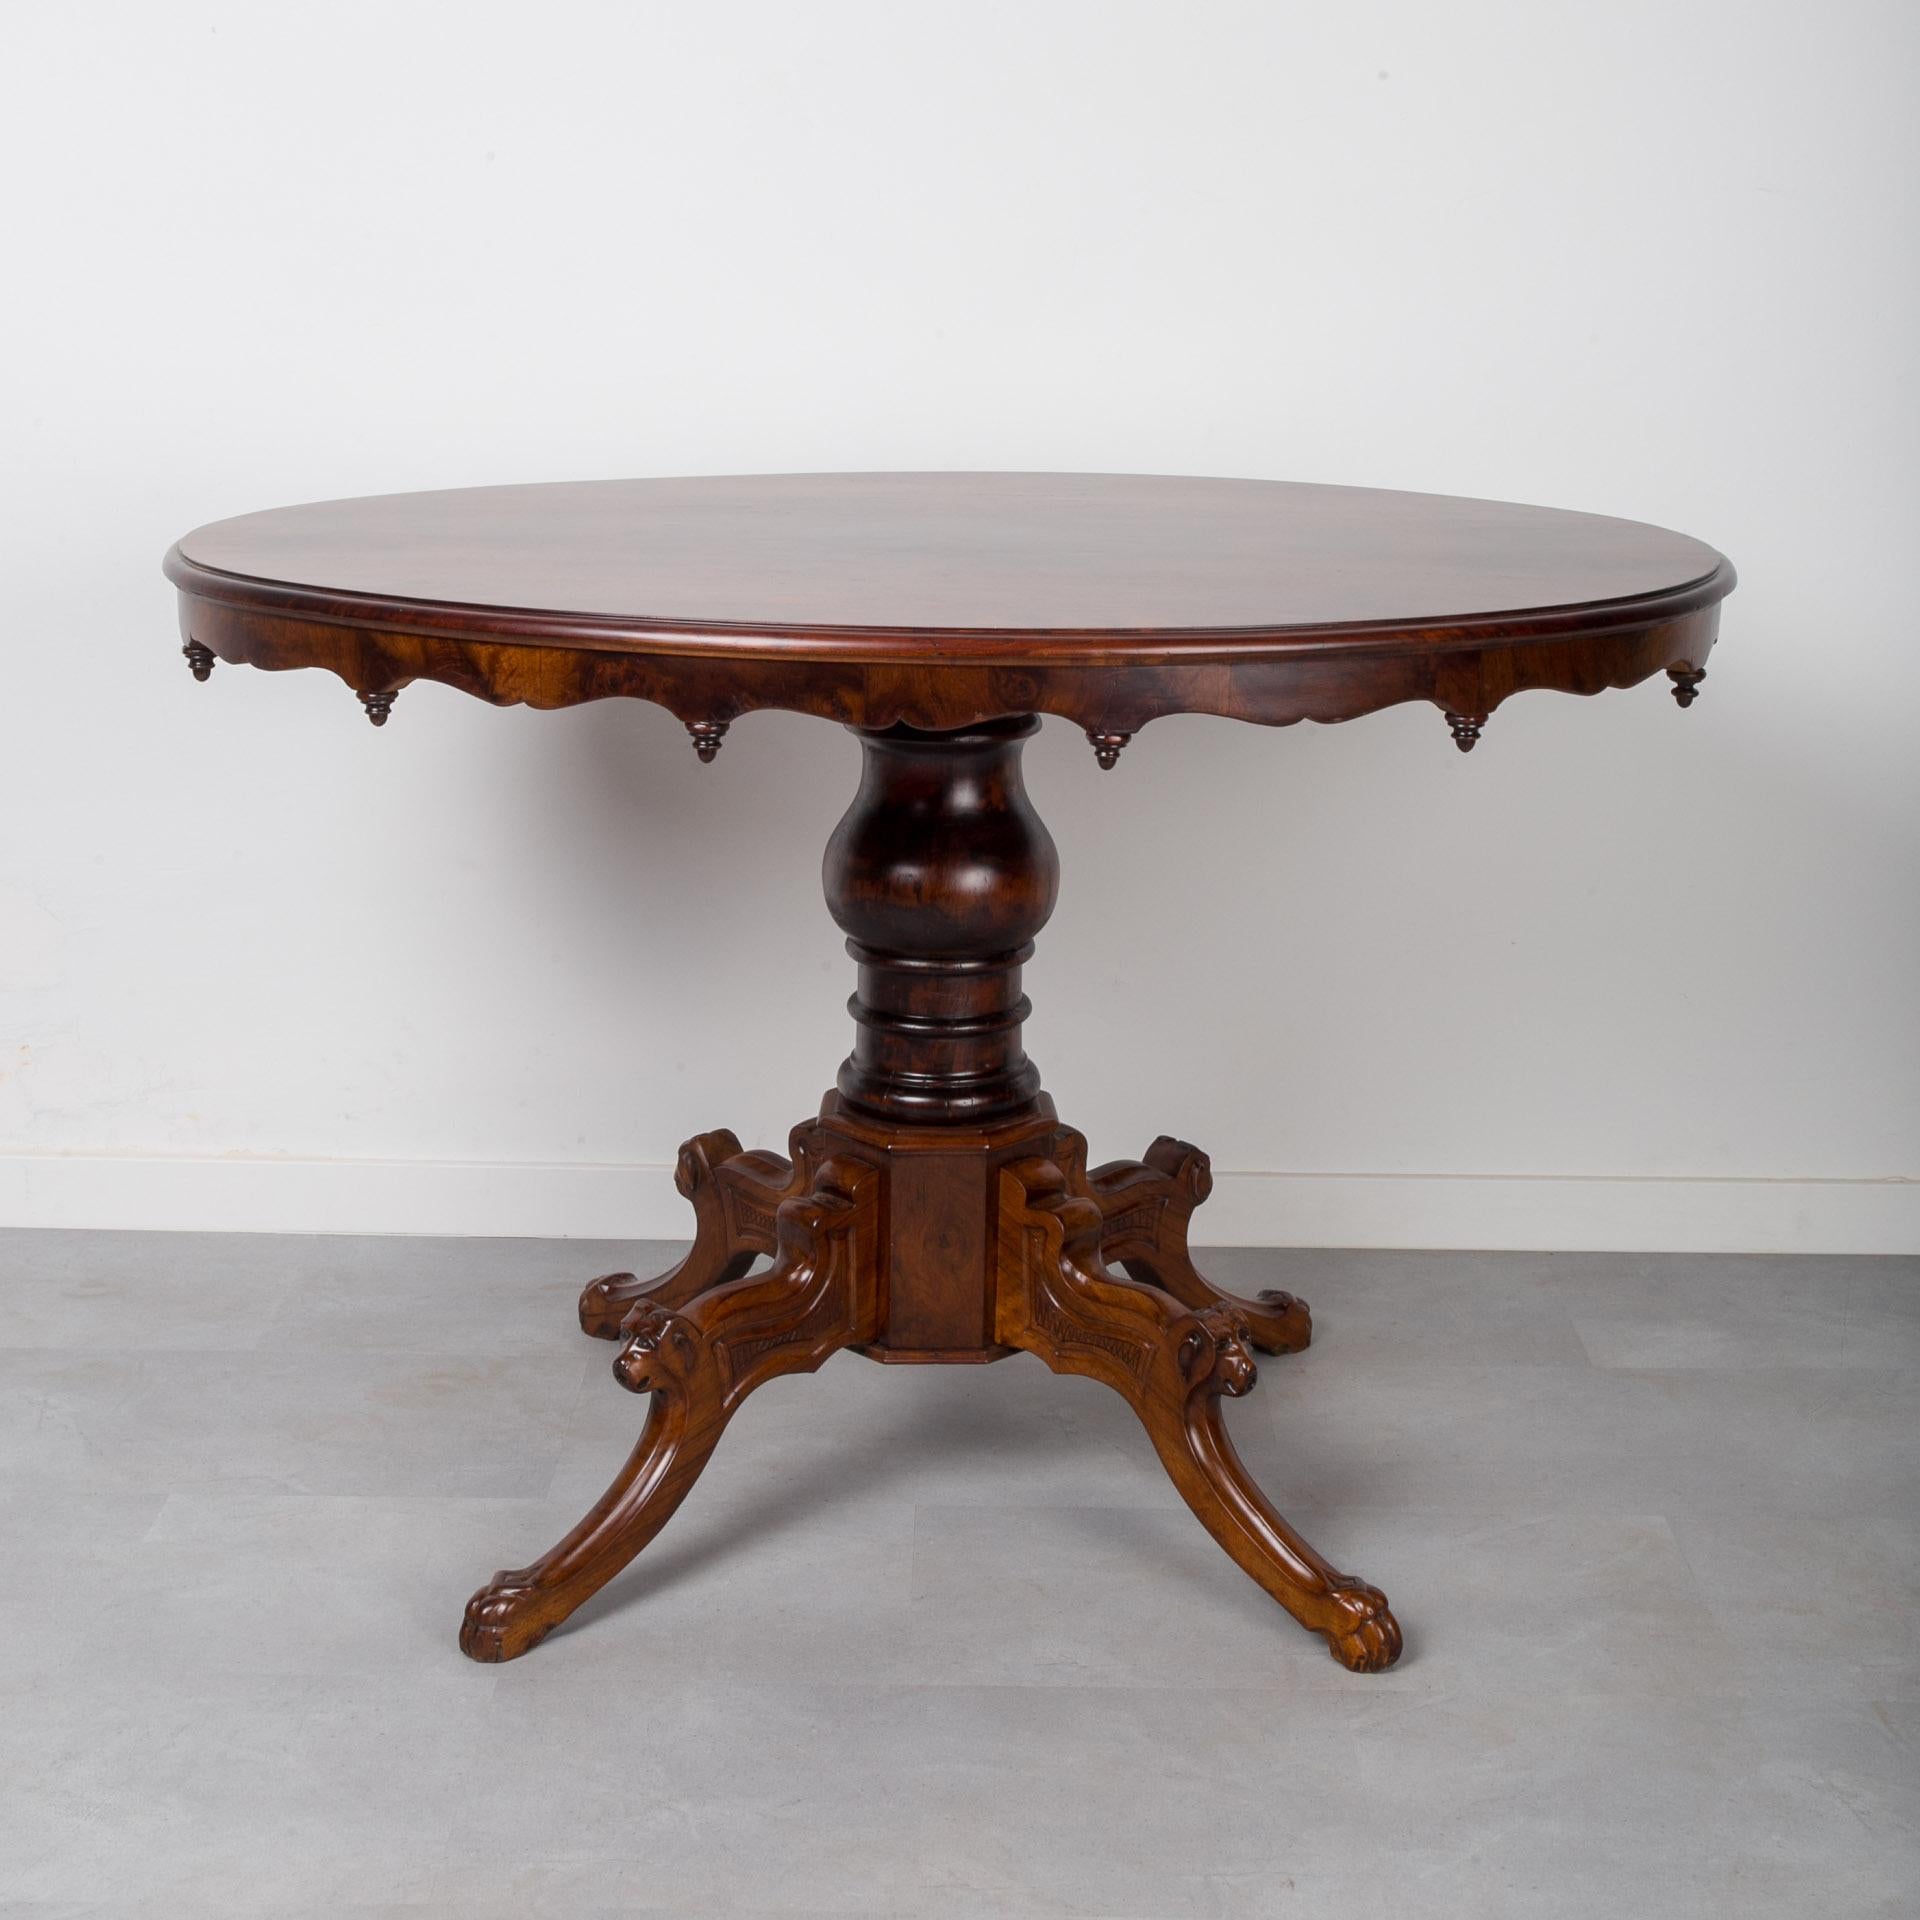 This Biedermeier oval table was made in Germany in 19th Century. It is supported on a solid walnut leg, the top is veneered with walnut. The piece has undergone a careful renovation process and is finished with semi-matte lacquer that not only gives